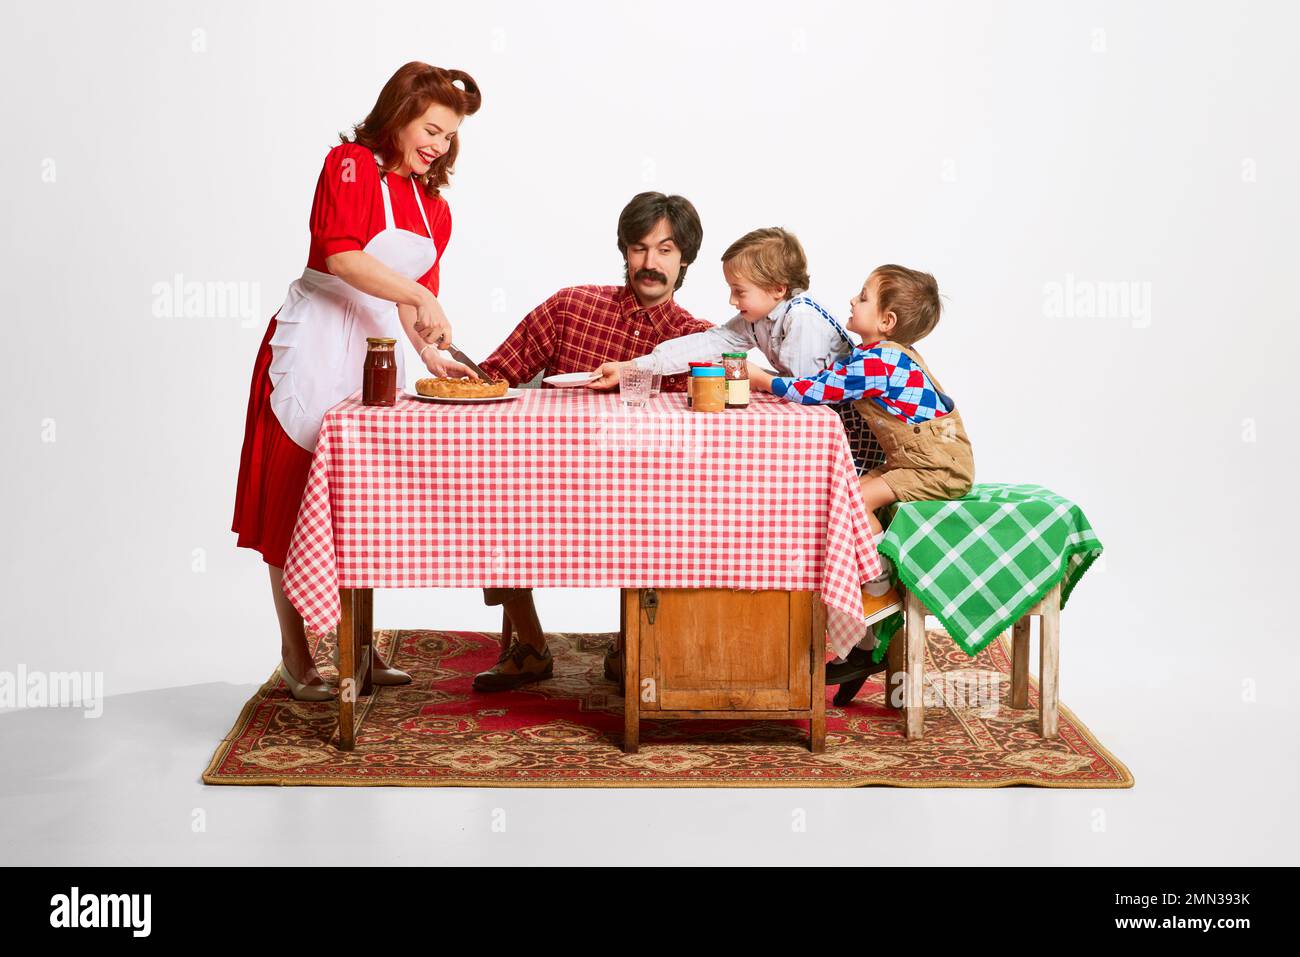 Noisy lovely family morning. Beautiful woman serving pie to her husband and sons sitting at kitchen table Stock Photo